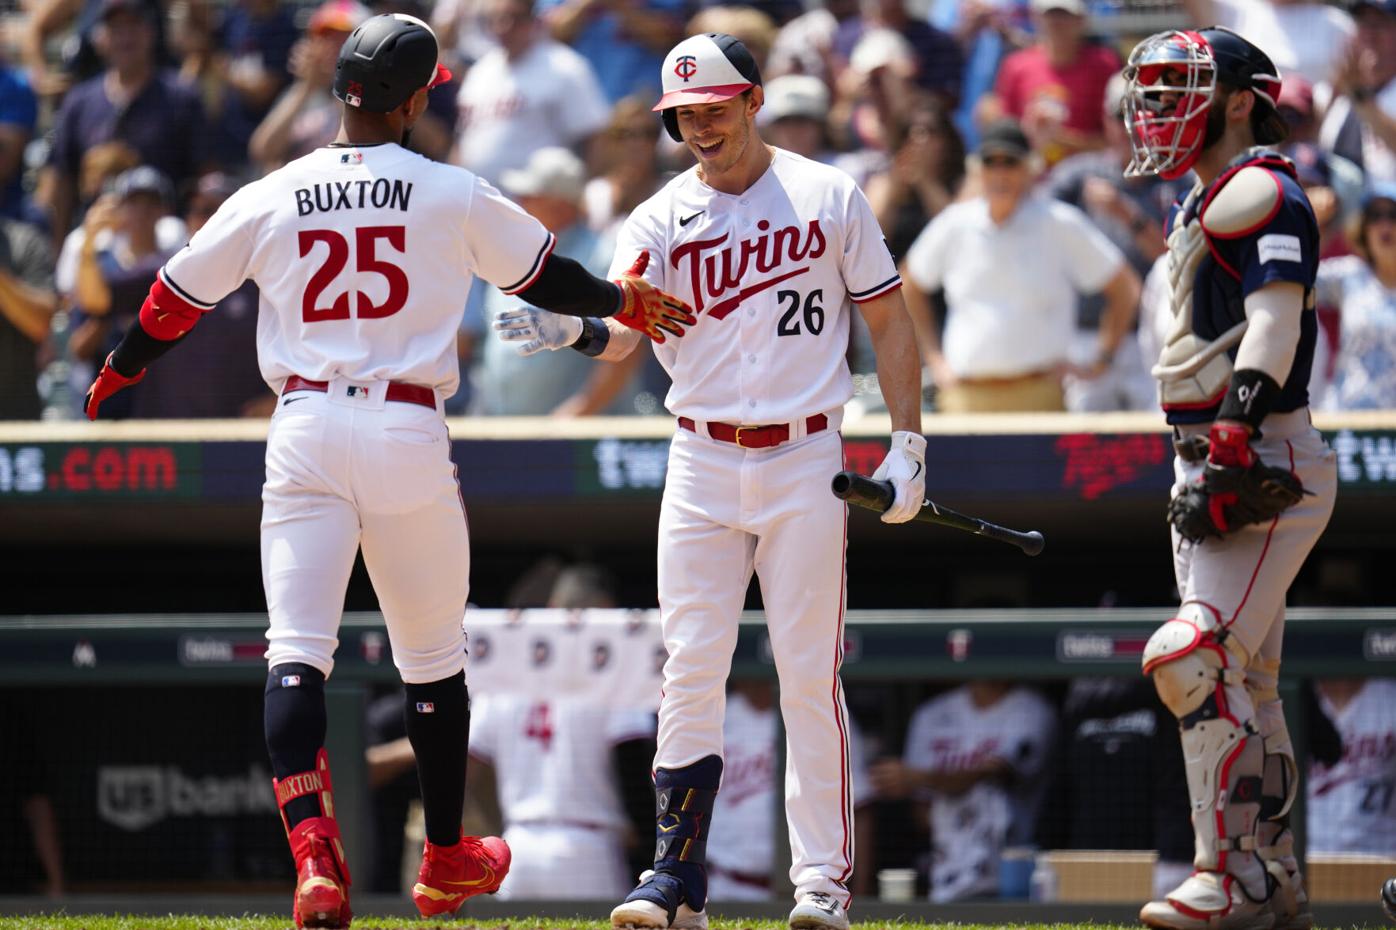 Twins first complete-game shutout in 5 years, 6-0 over Sox